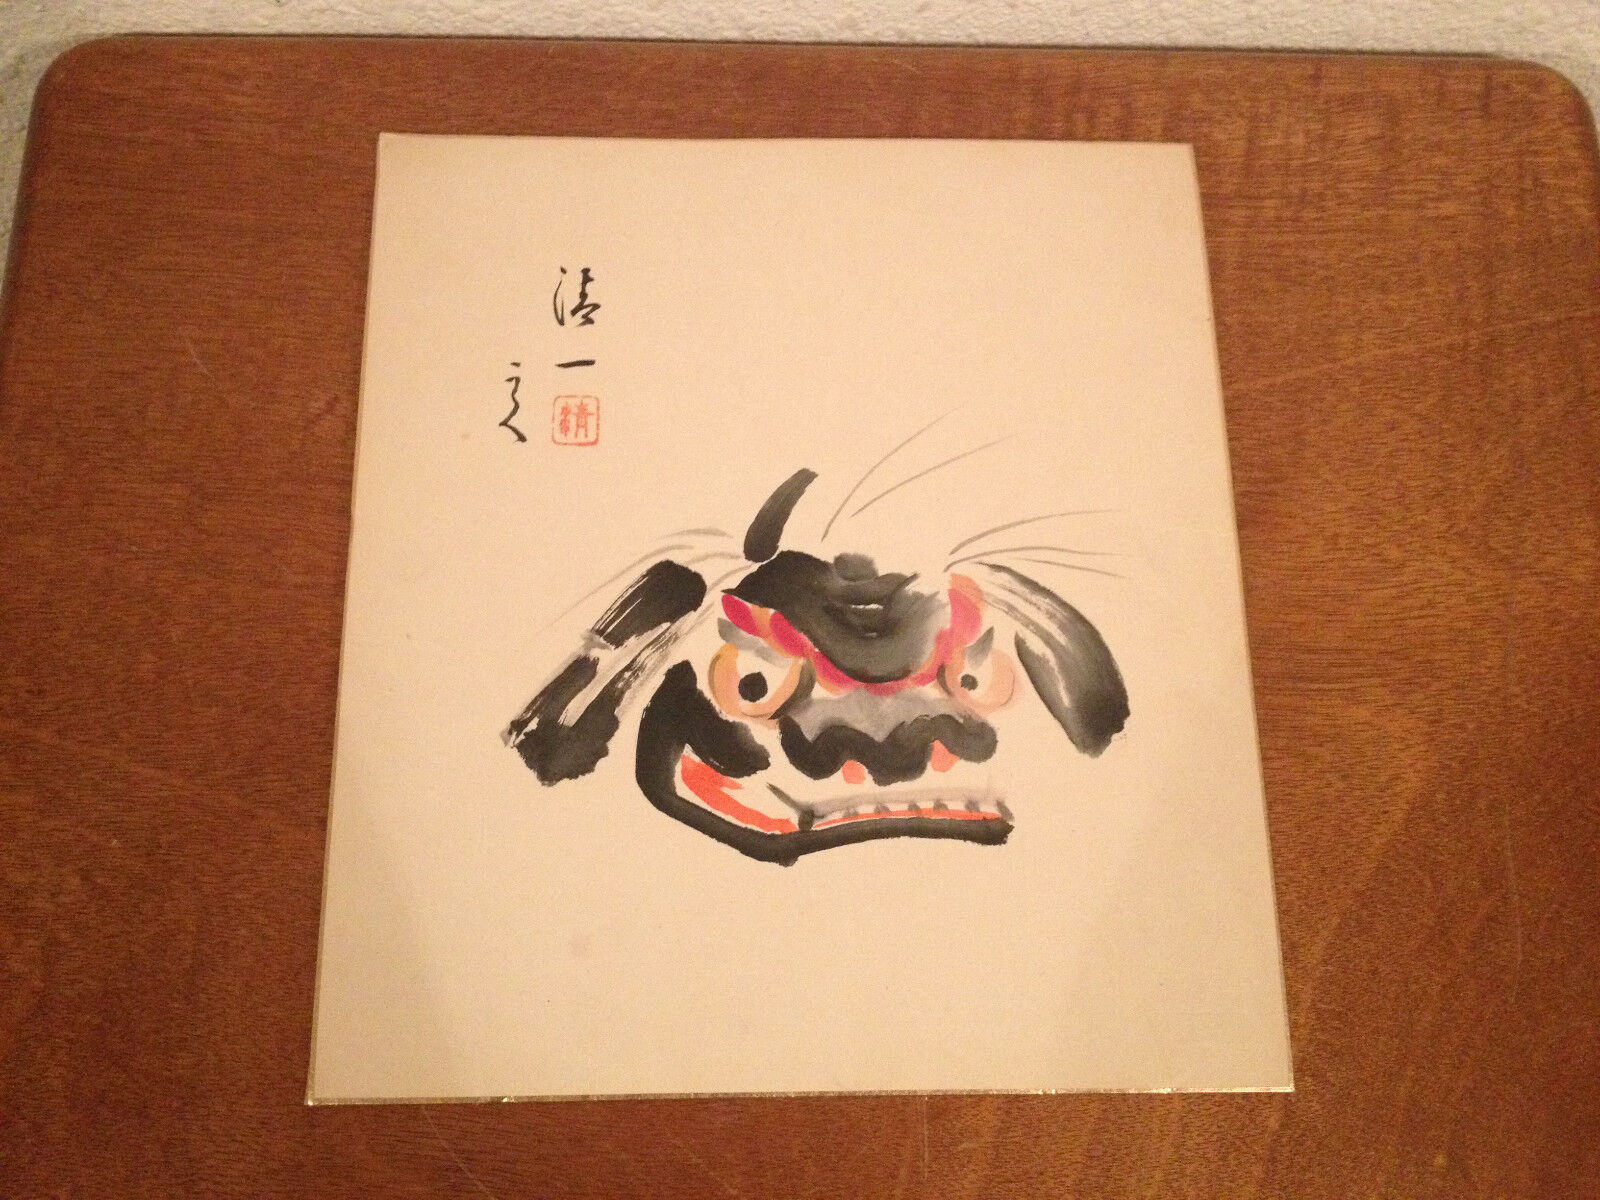 Vintage Asian Chinese Signed Watercolor Painting of Fu Dog / Mythical Beast Face